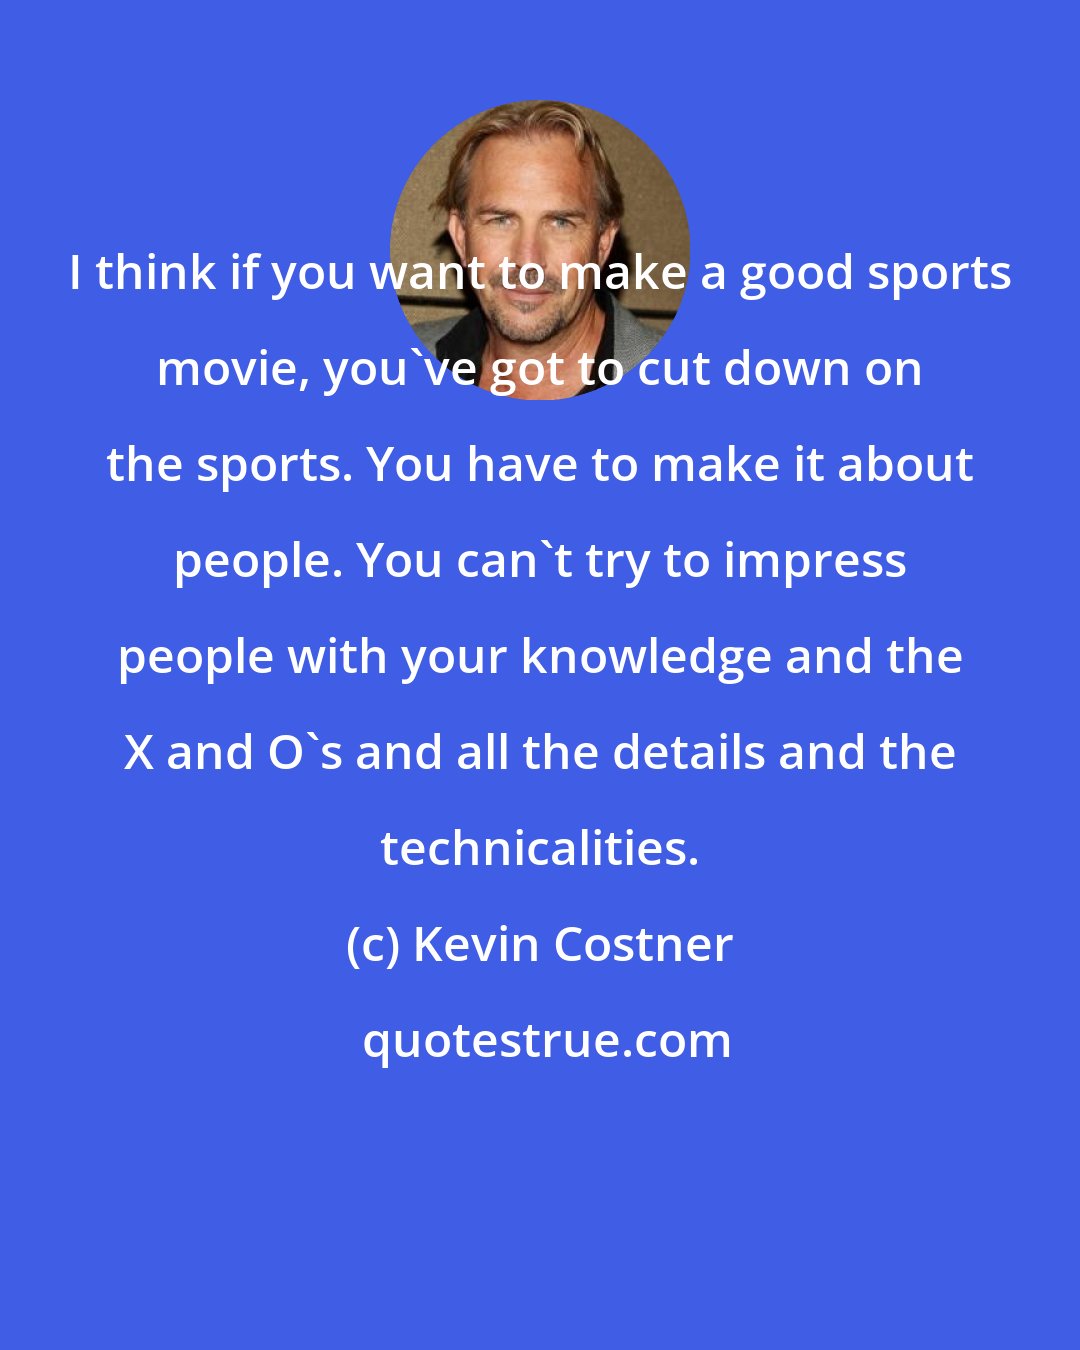 Kevin Costner: I think if you want to make a good sports movie, you've got to cut down on the sports. You have to make it about people. You can't try to impress people with your knowledge and the X and O's and all the details and the technicalities.